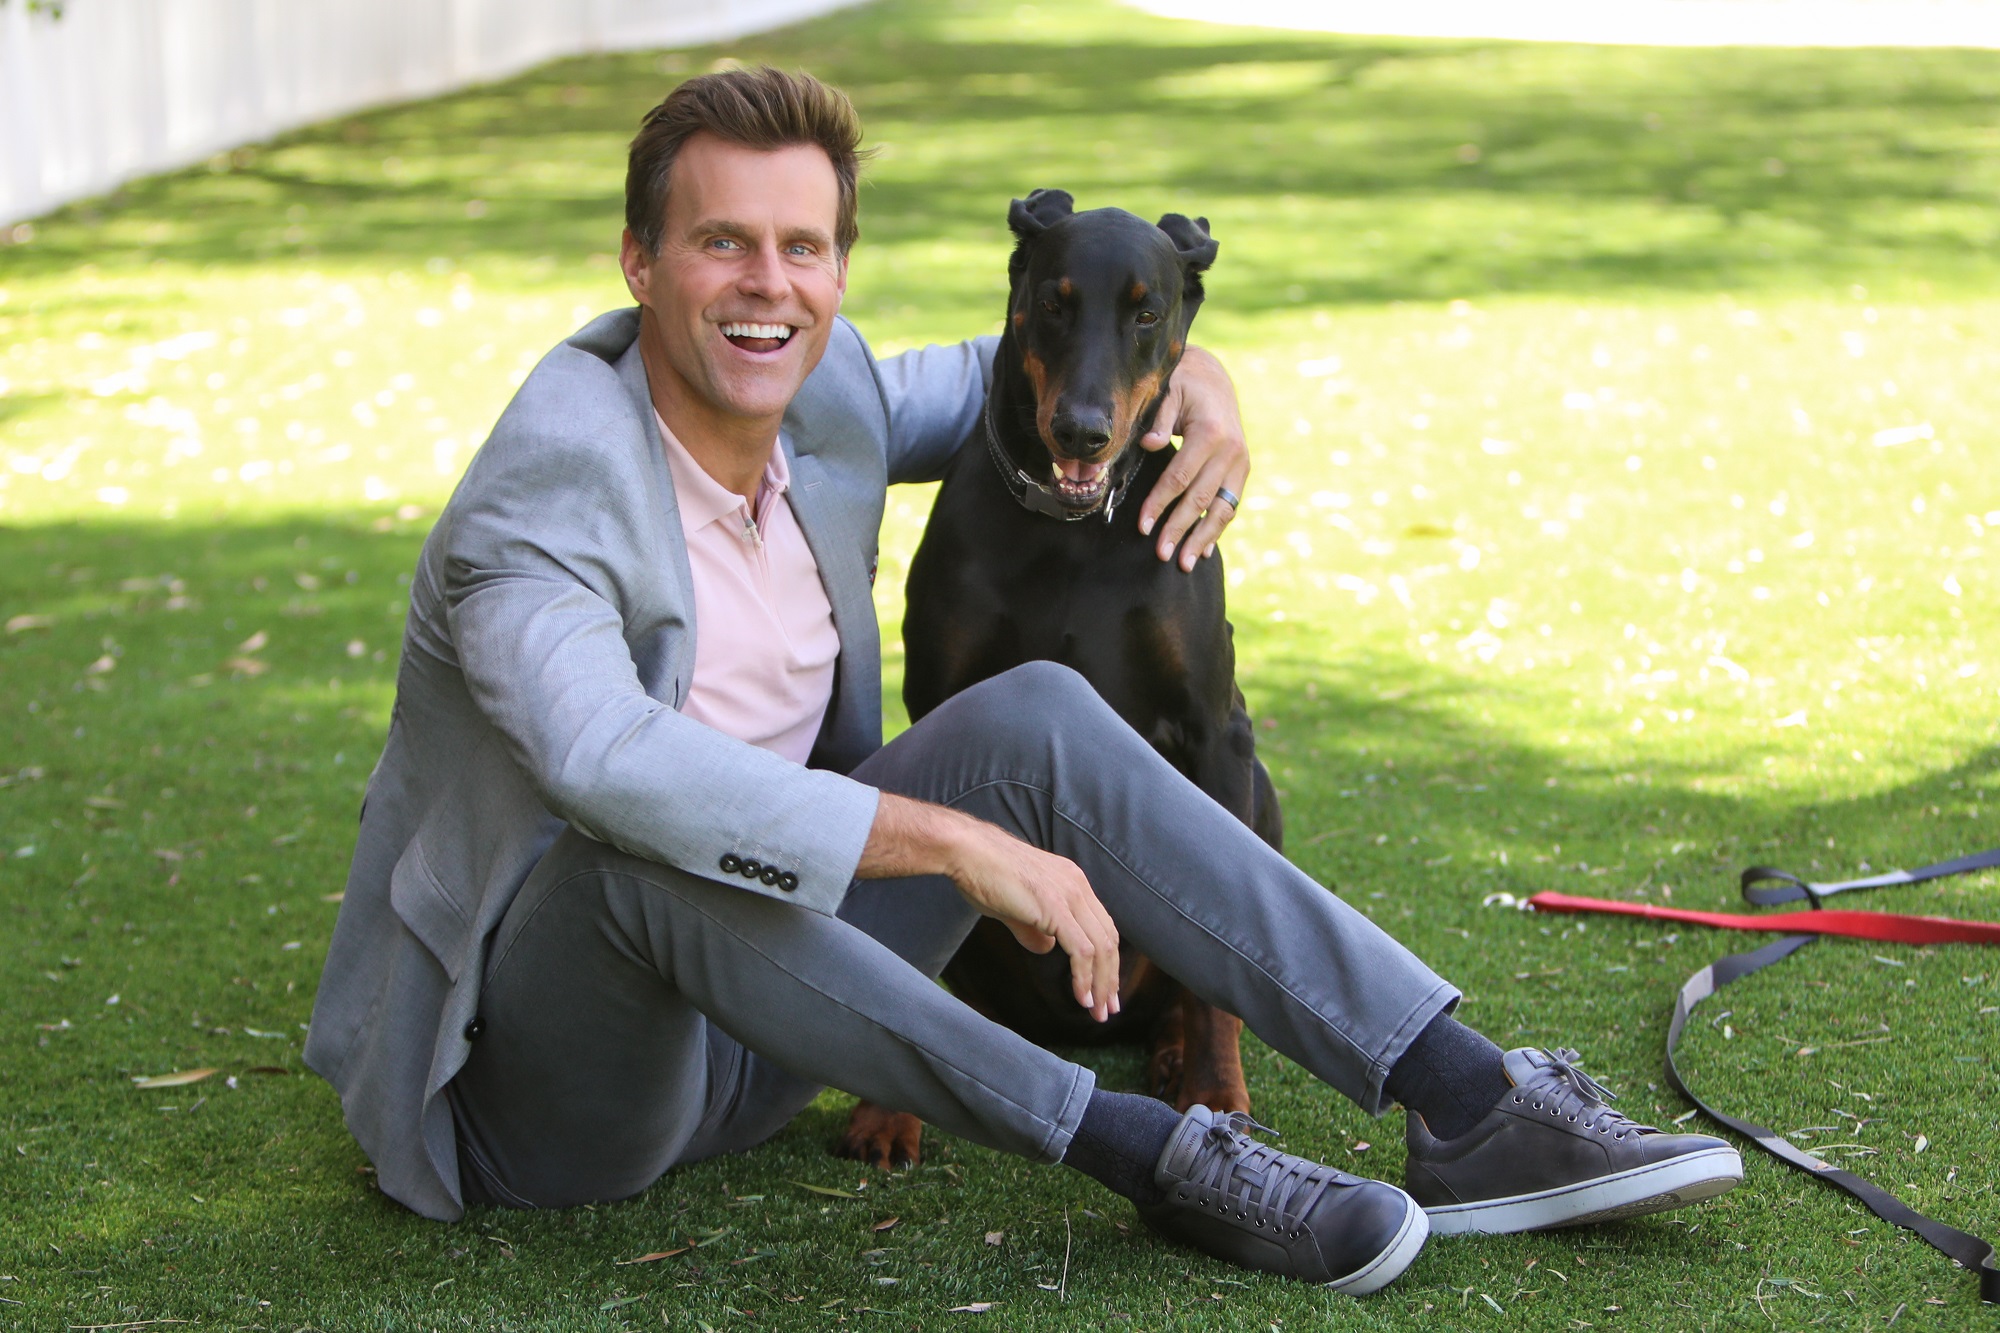 General Hospital comings and goings will focus on Cameron Mathison, pictured here with his family dog Red